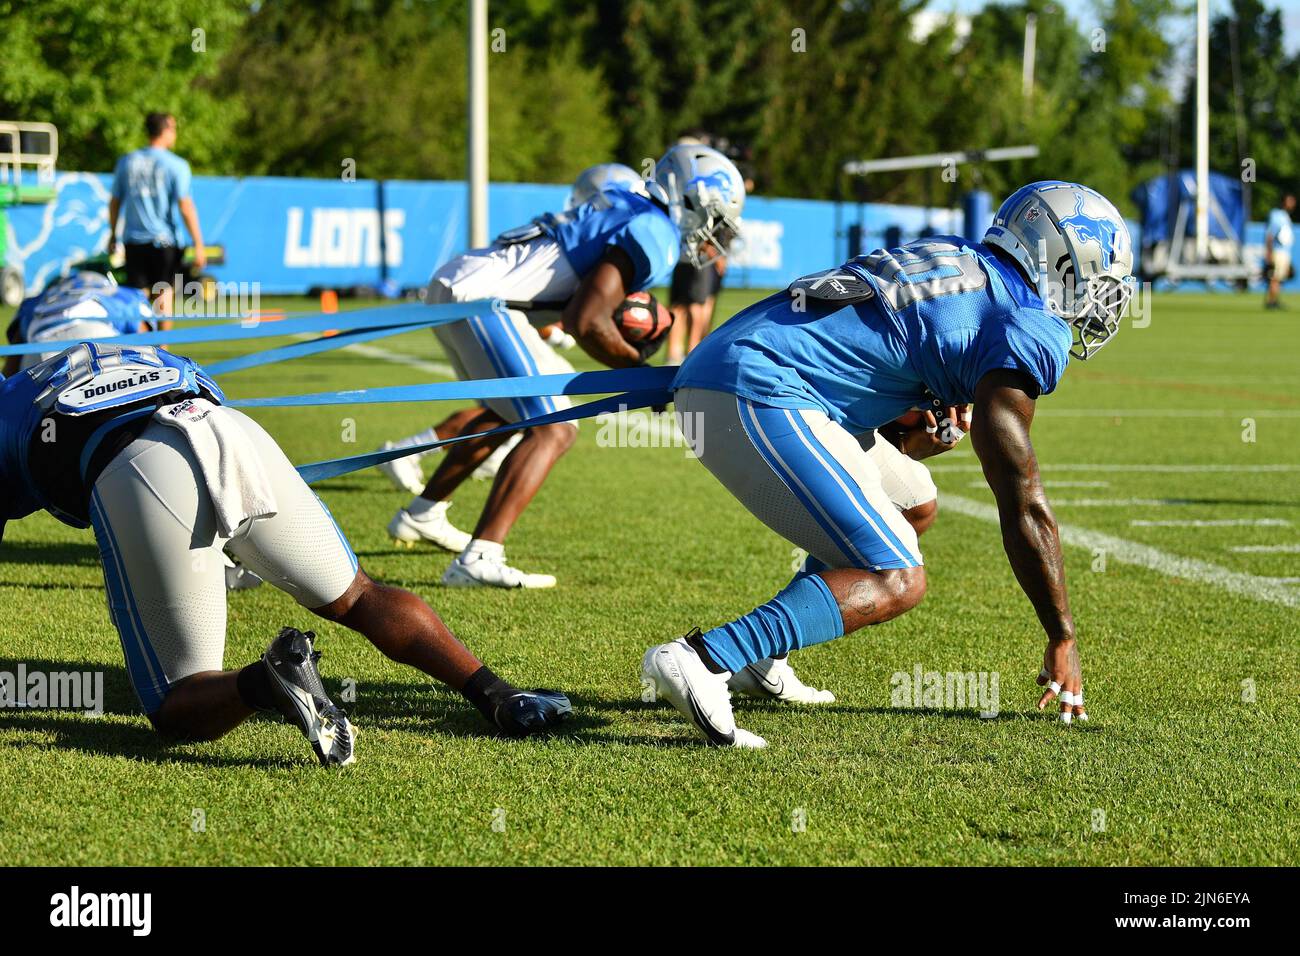 ALLEN PARK, MI - AUGUST 09: The running backs, including Detroit Lions RB Jamaal Williams (30), participate in resistance training during Lions training camp on August 9, 2022 at Detroiit Lions Training Facility in Allen Park, MI (Photo by Allan Dranberg/CSM) Credit: Cal Sport Media/Alamy Live News Stock Photo